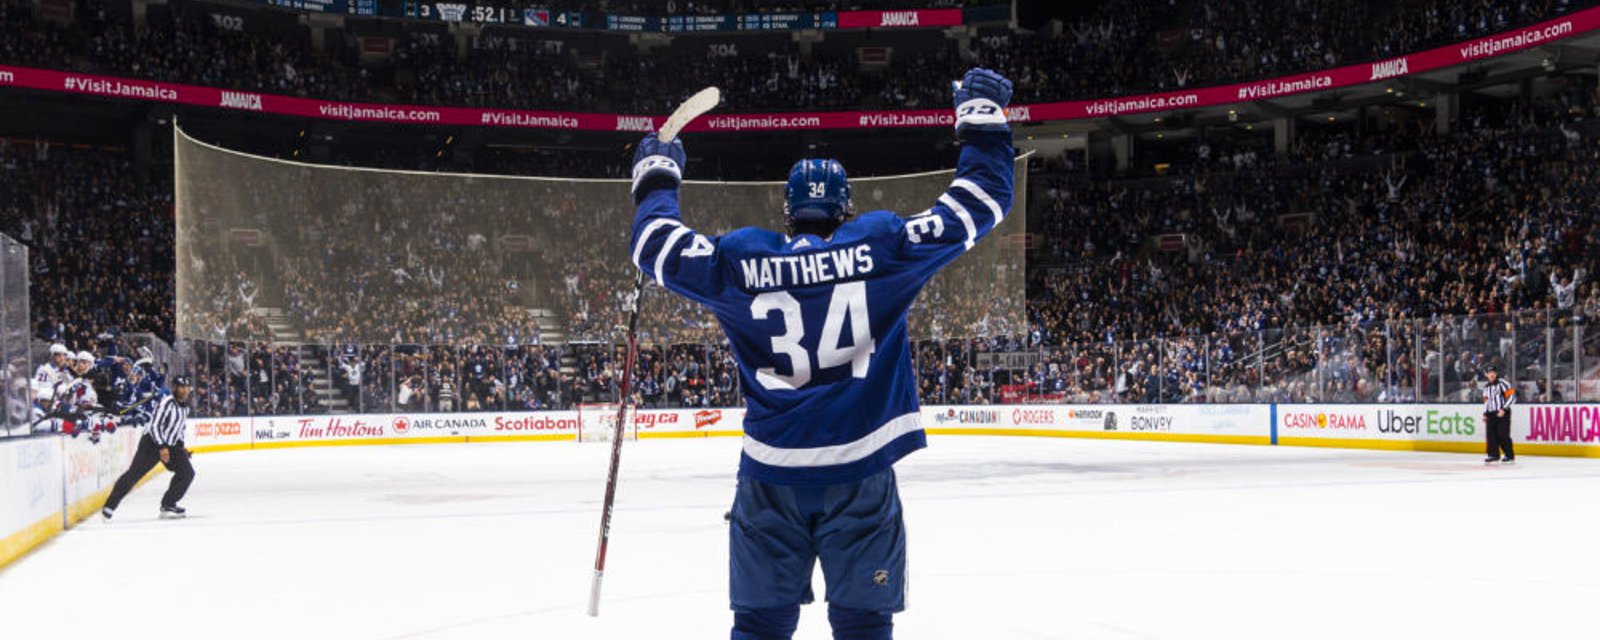 Leafs roll expensive top line worth close $30 M in tonight's game